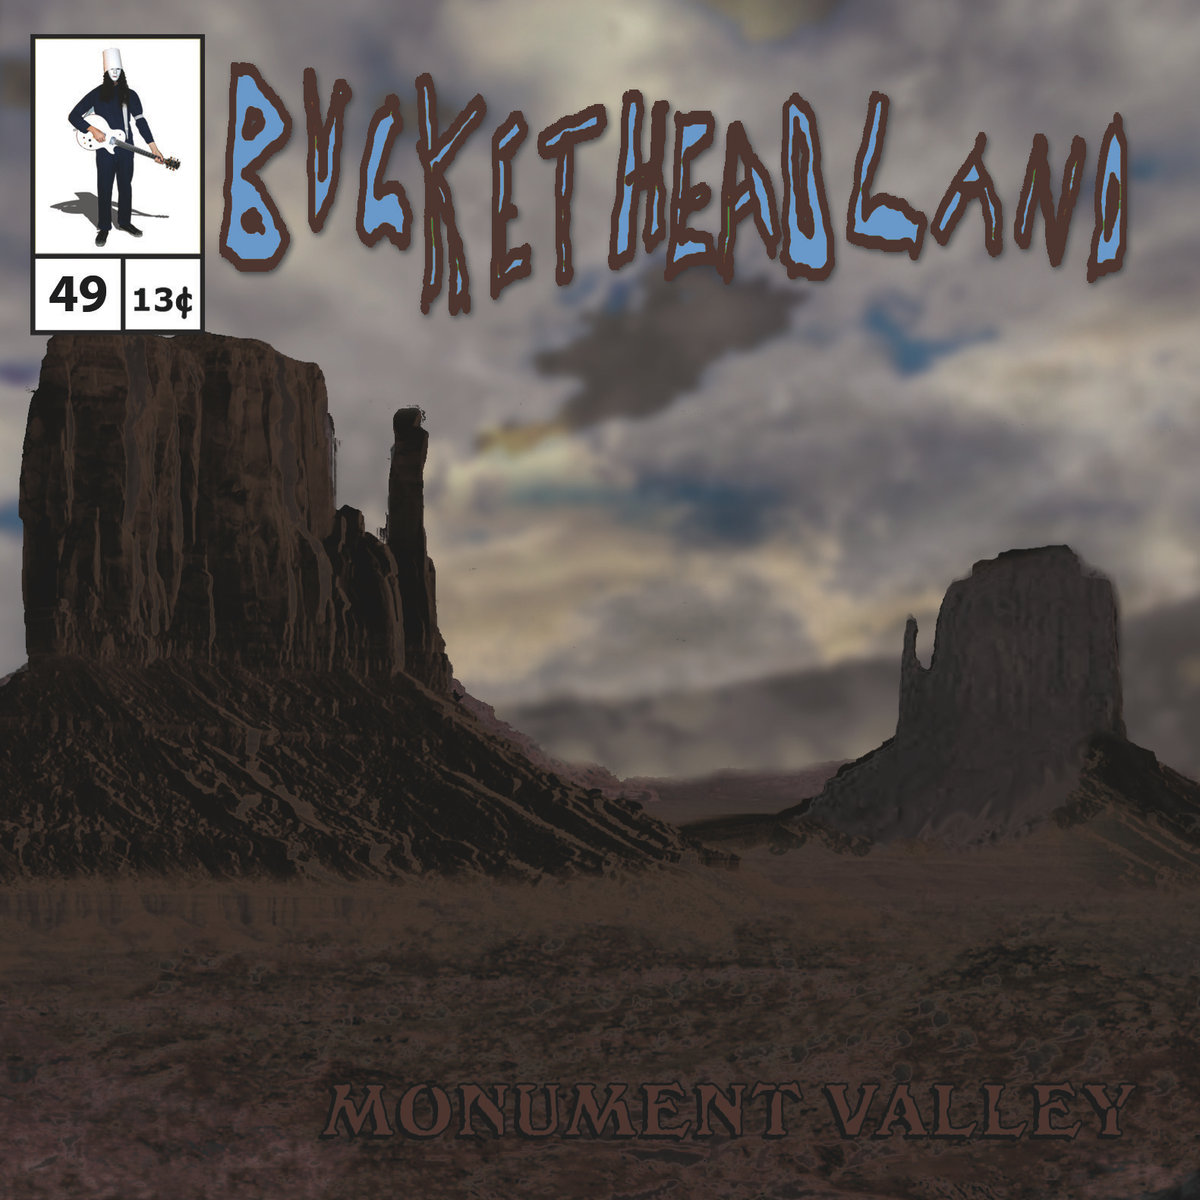 Buckethead - Pike 49: Monument Valley (2014)